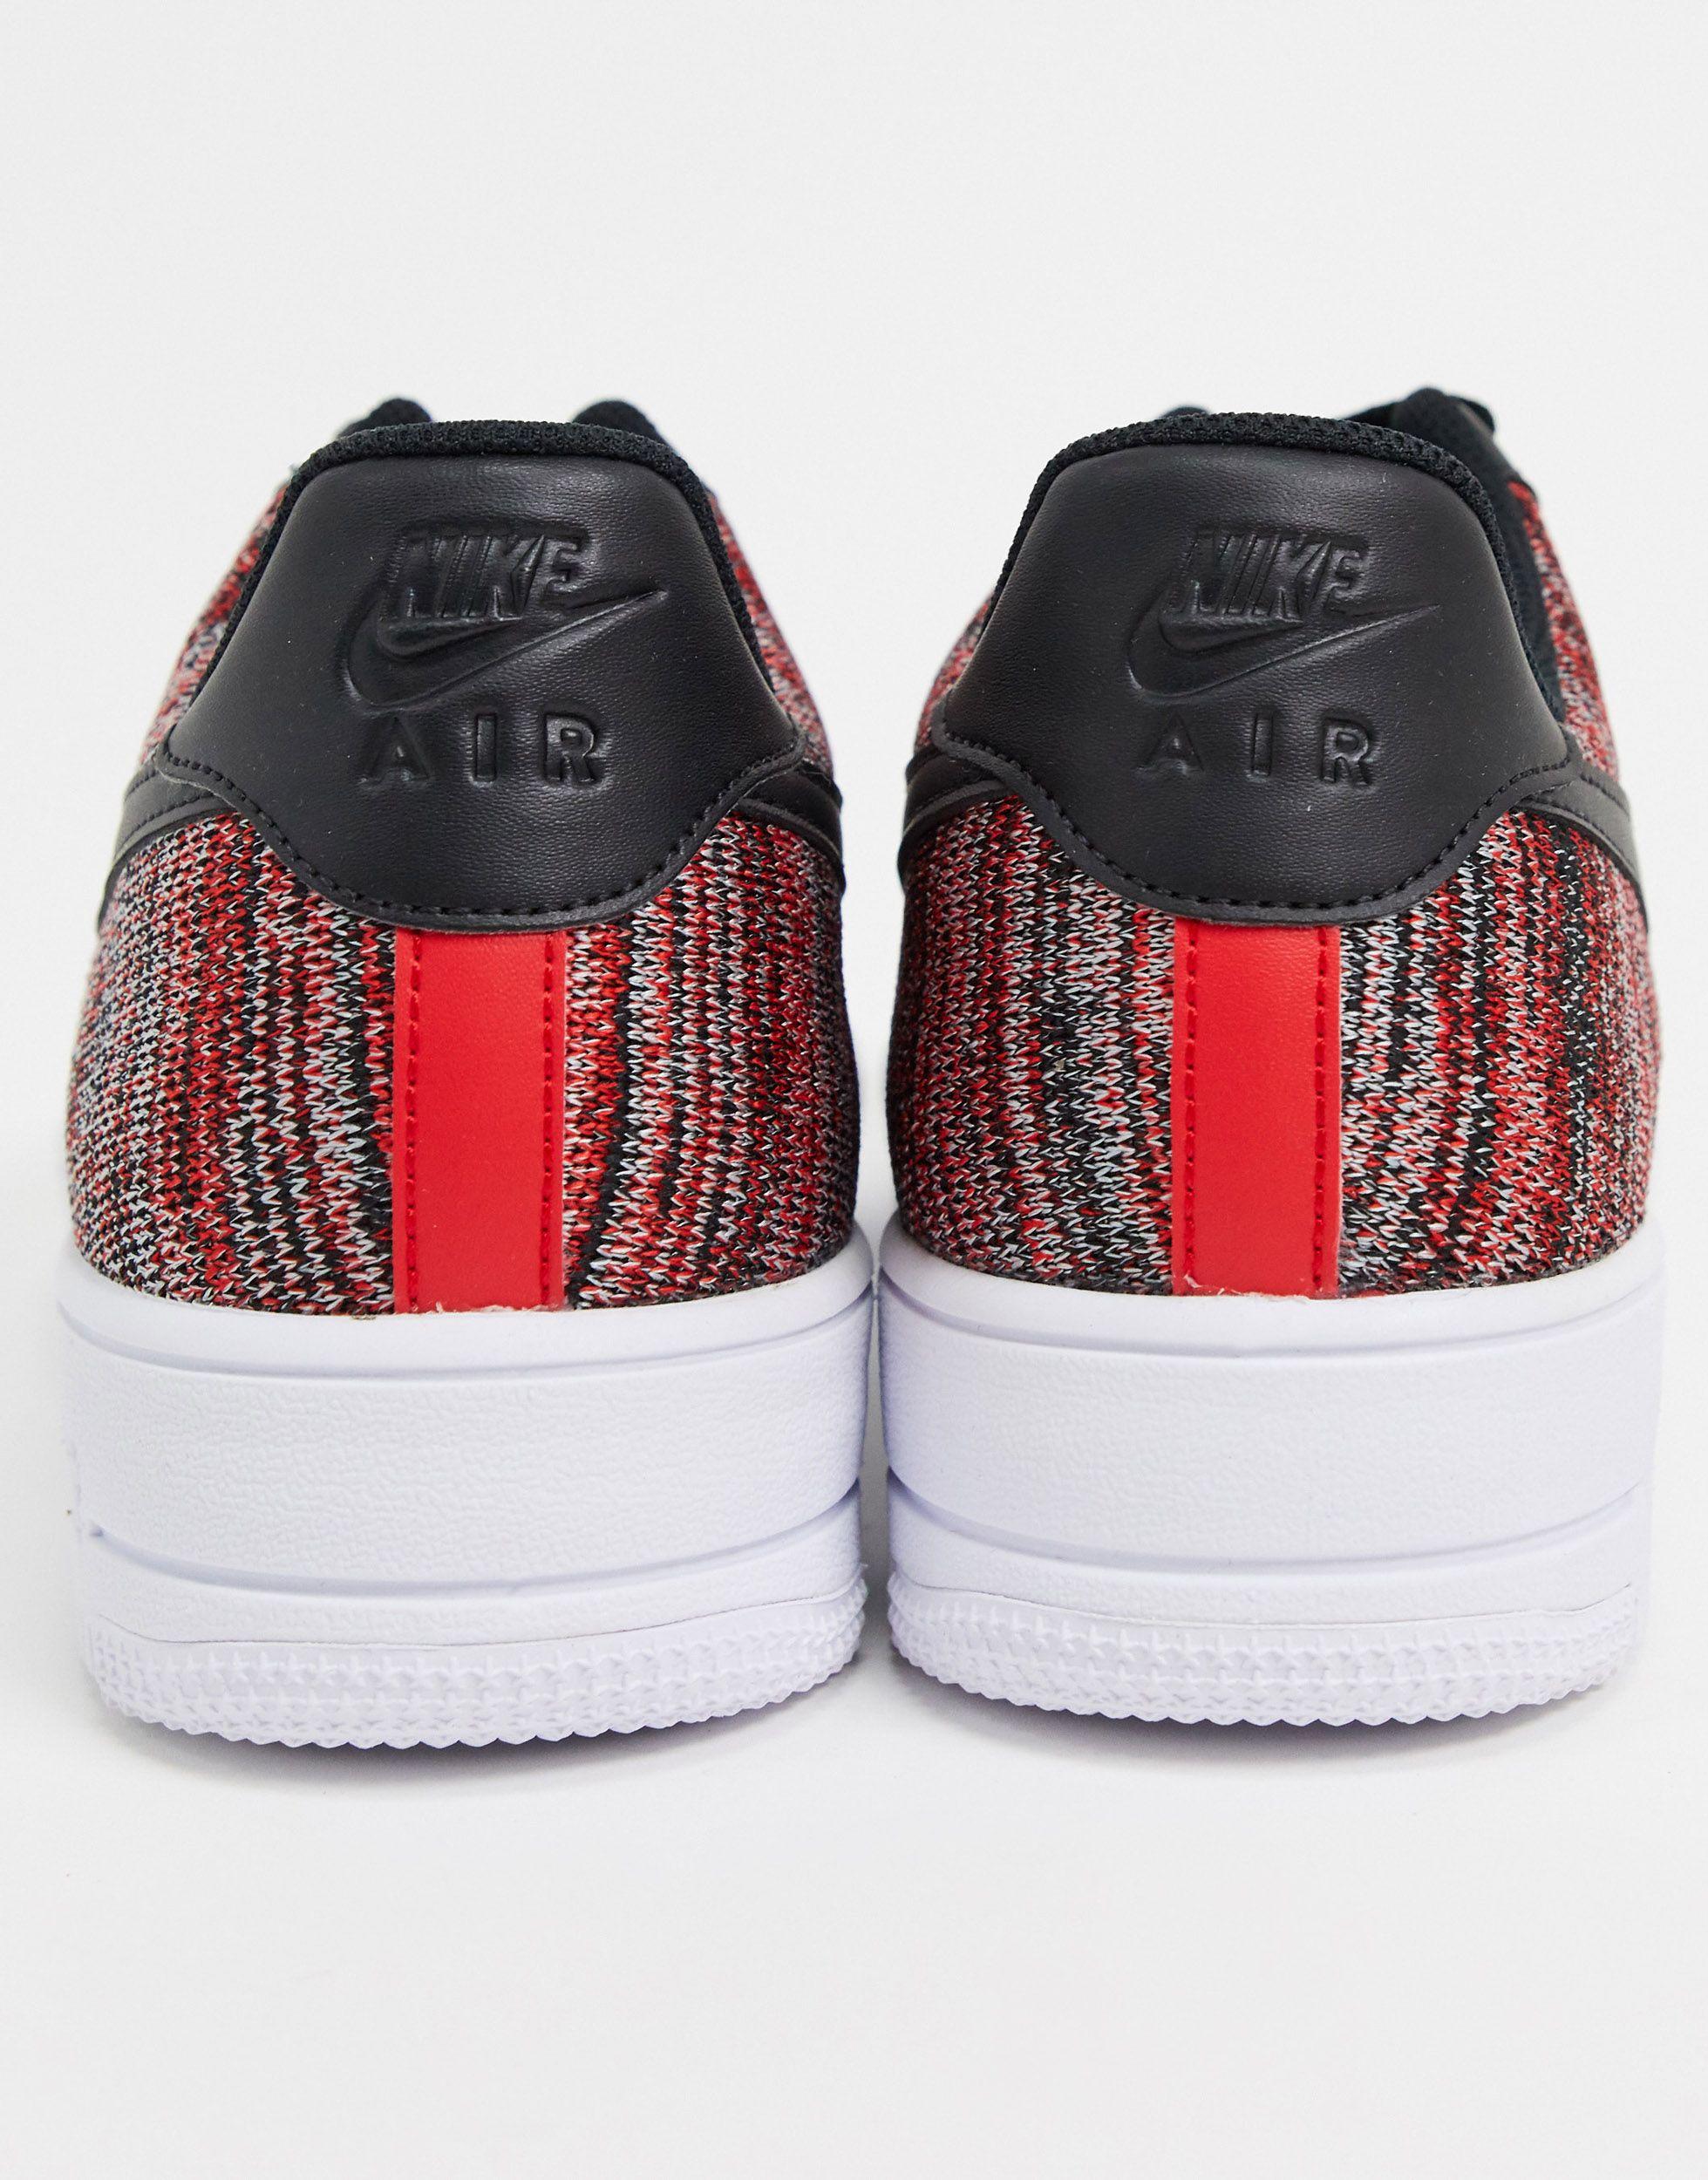 Nike Men's Air Force 1 Flyknit 2.0 Shoes, Red